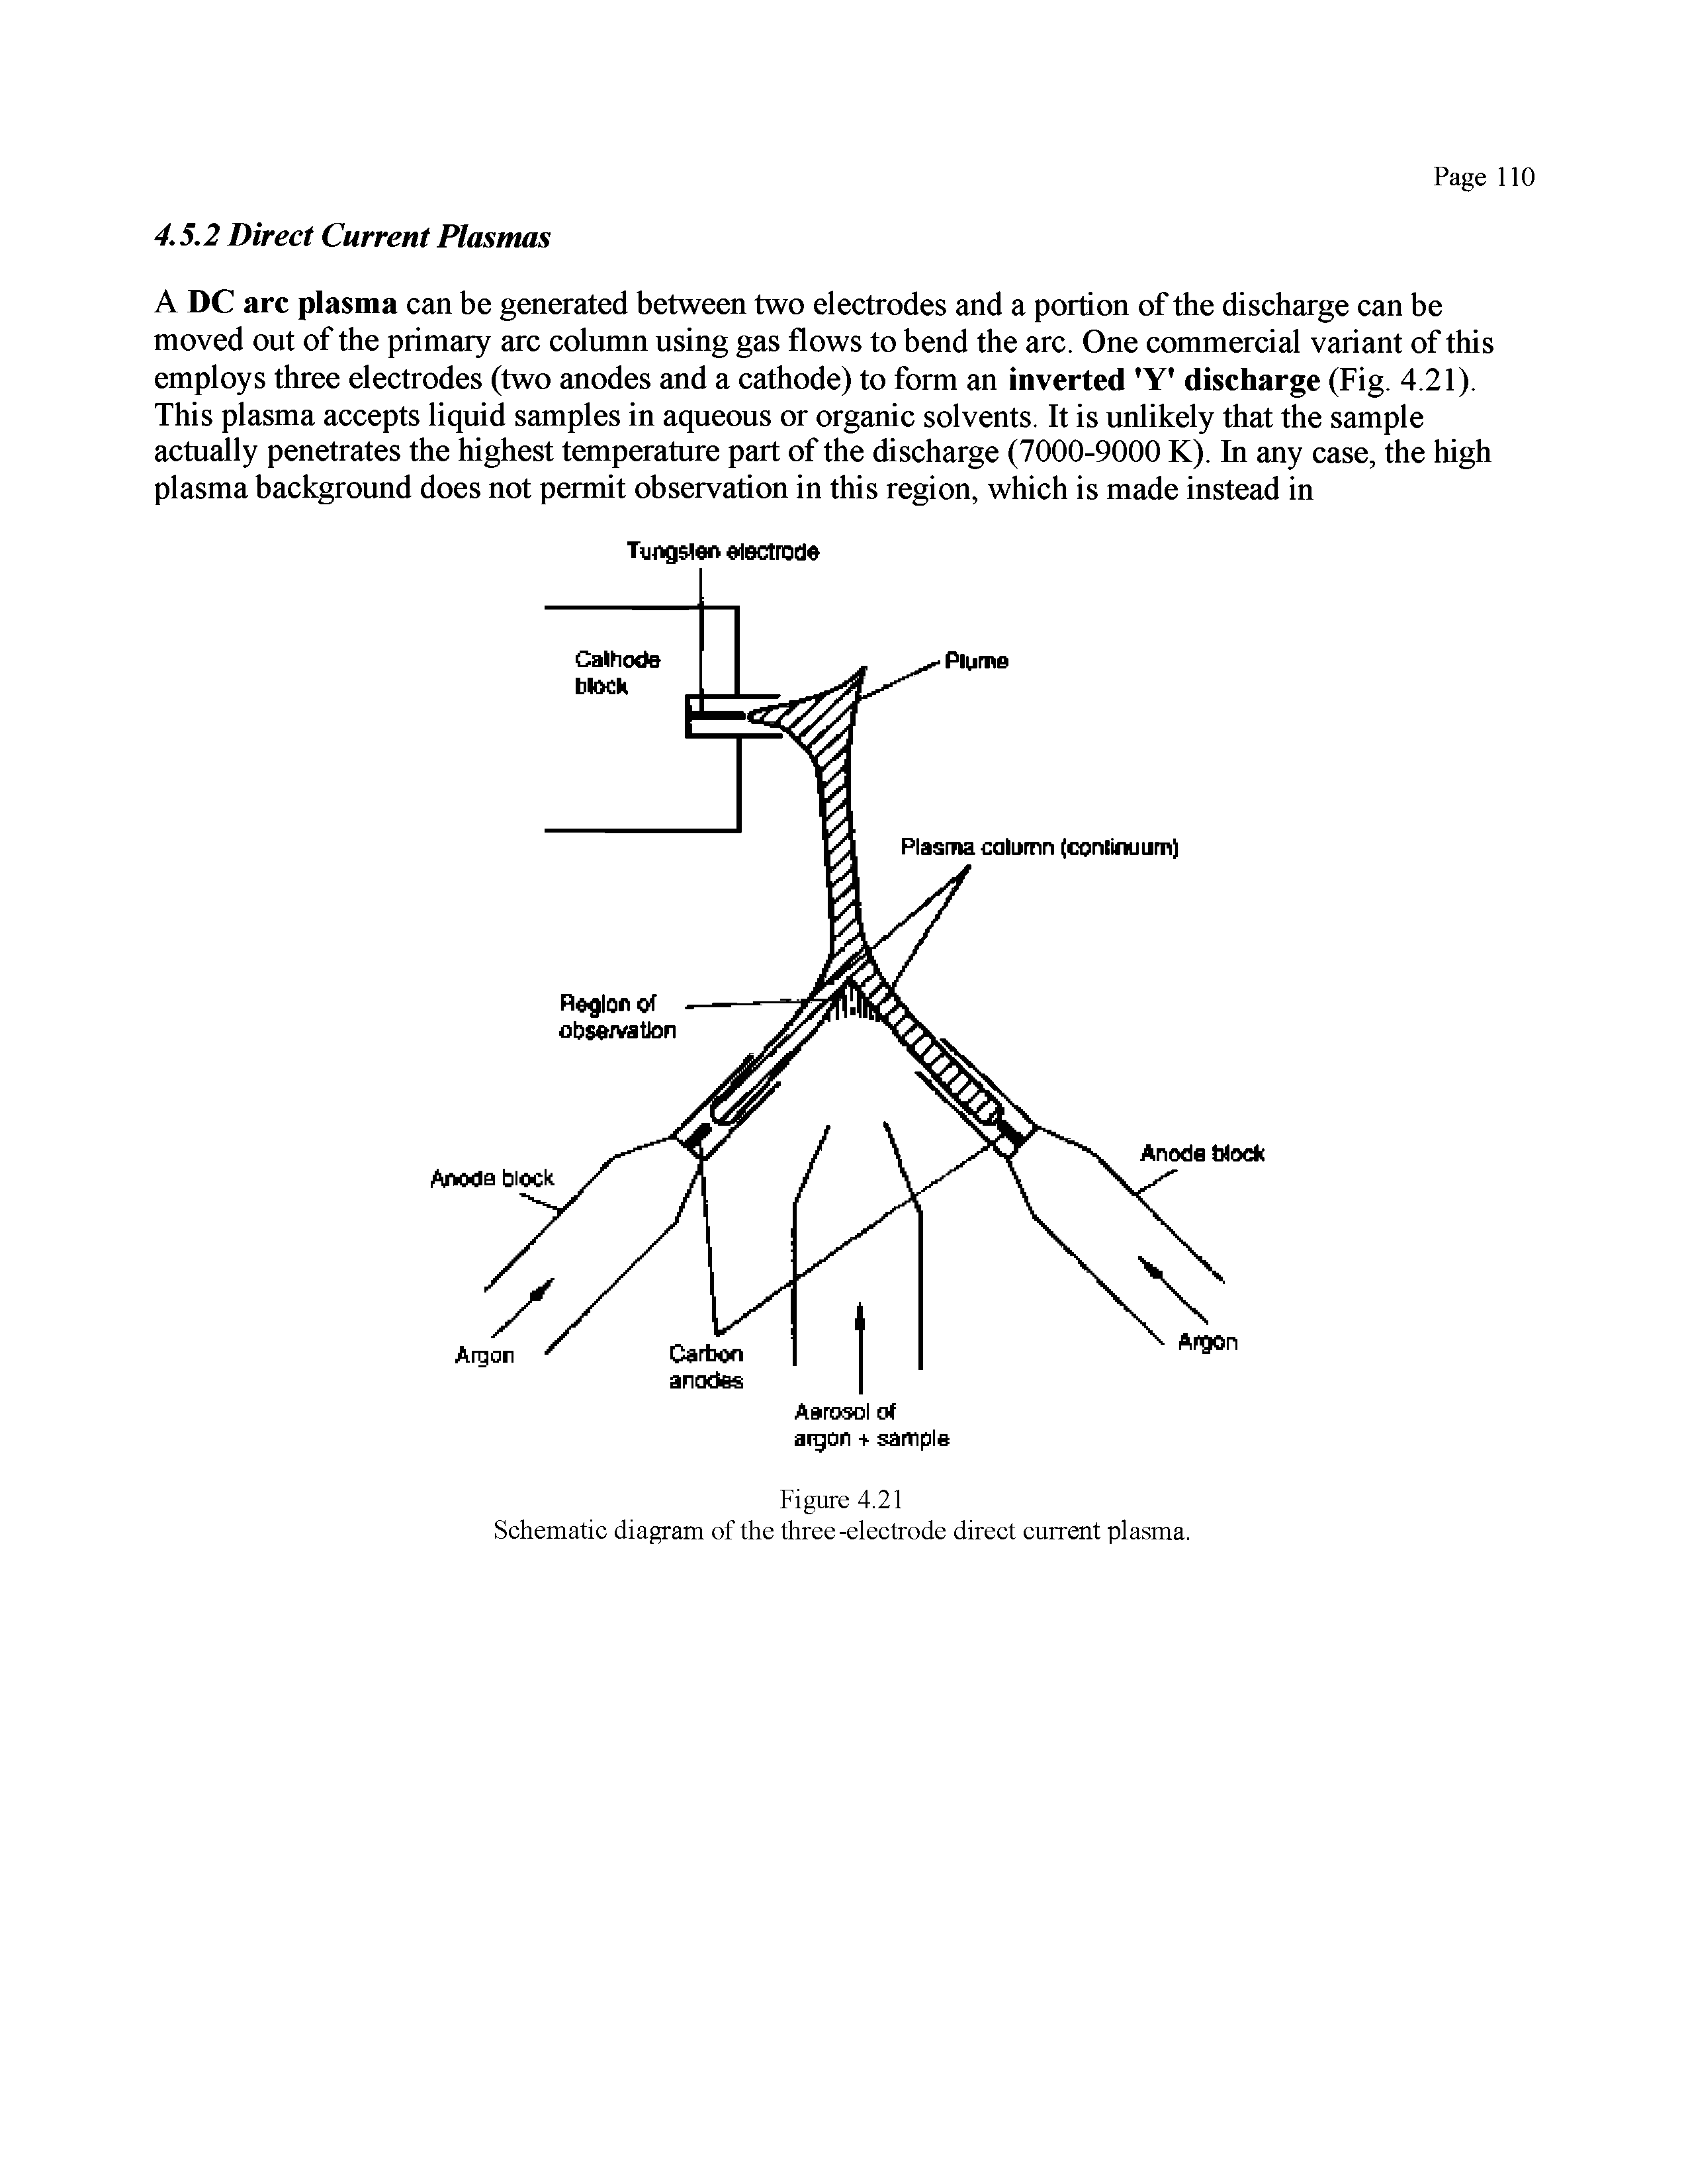 Schematic diagram of the three-electrode direct current plasma.